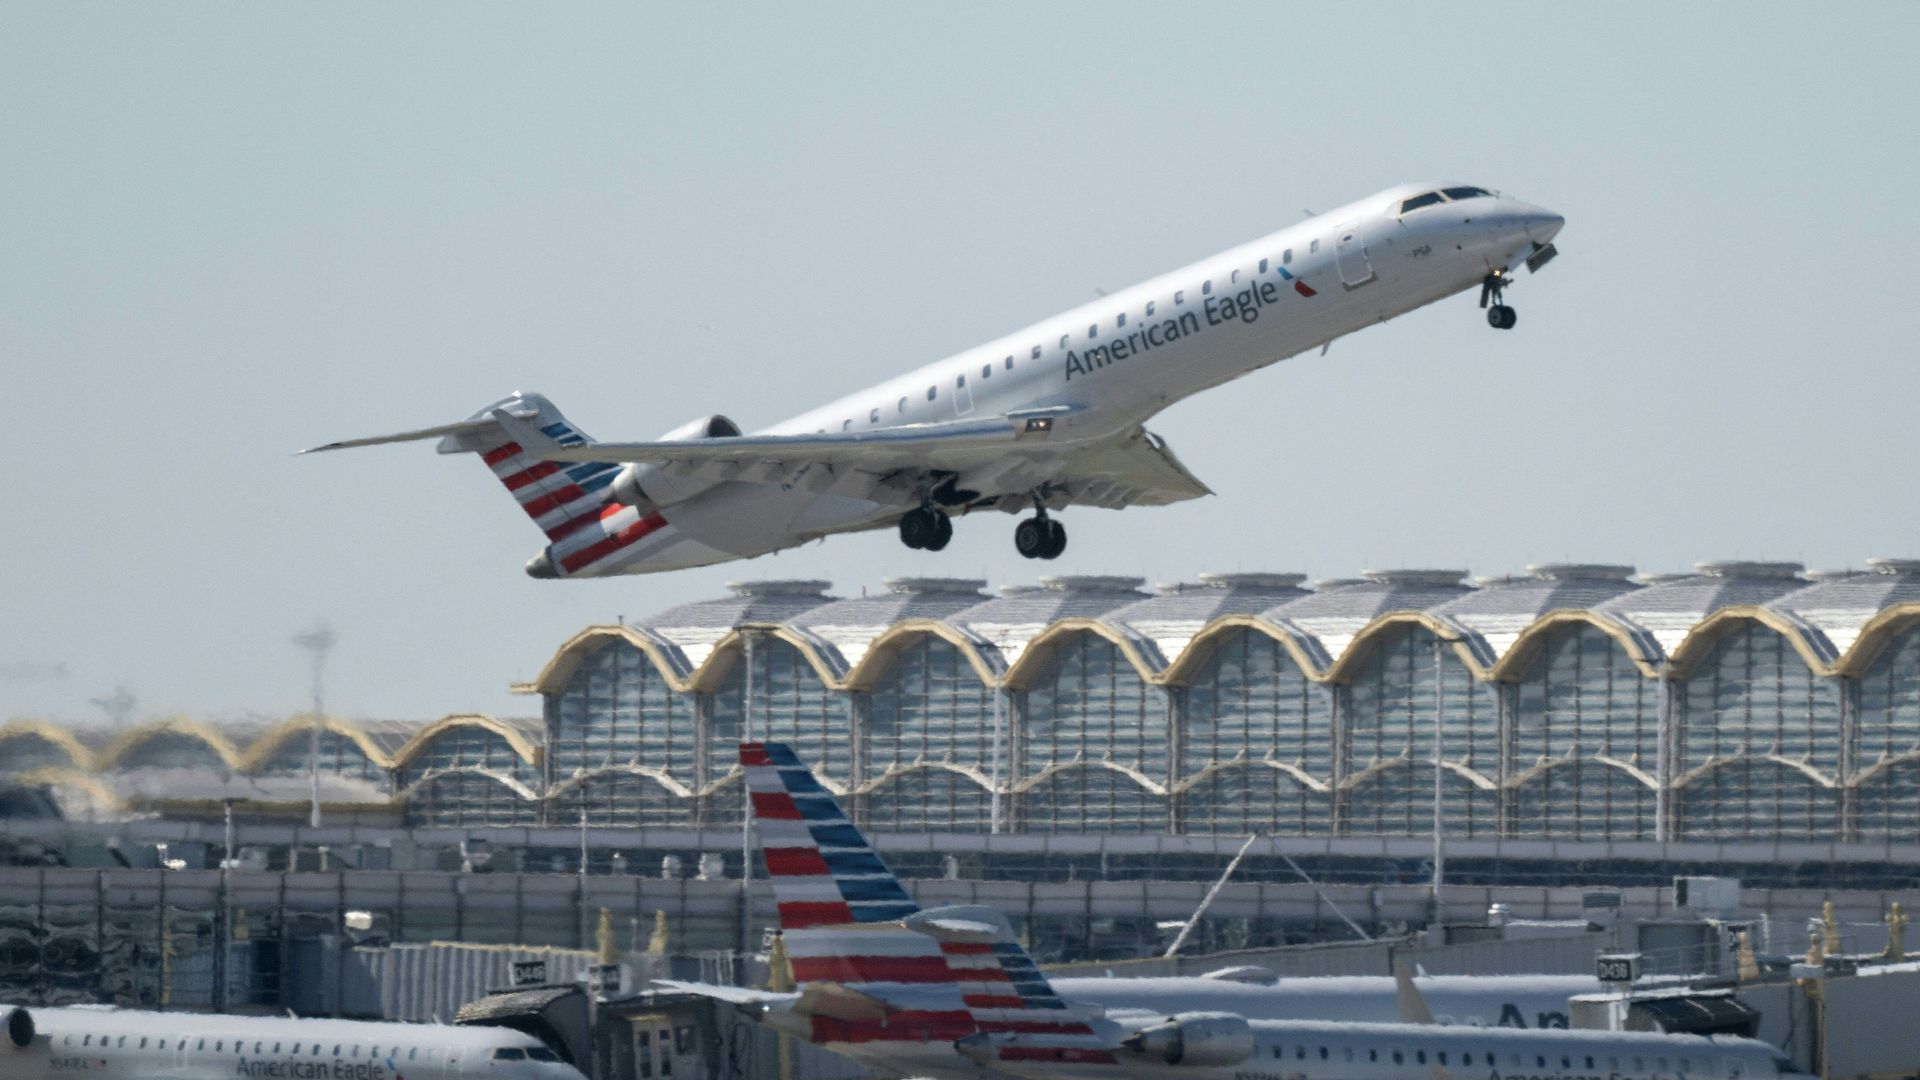 Photo of an American Airlines aircraft taking off from an airport